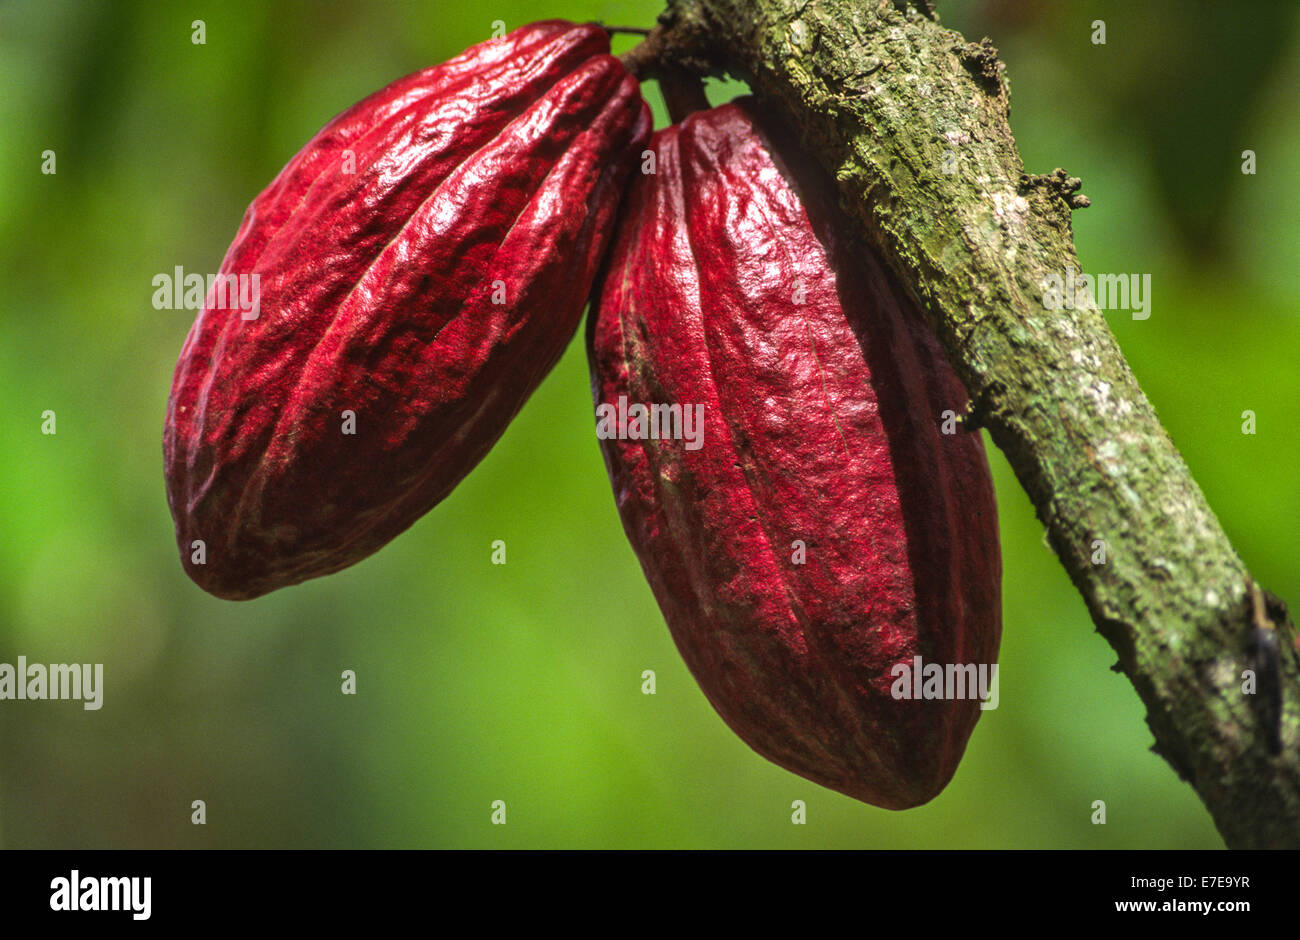 KAKAOBOHNE [Theobroma Cacao] PODS ON A TREE IN THE WEST INDIES Stockfoto